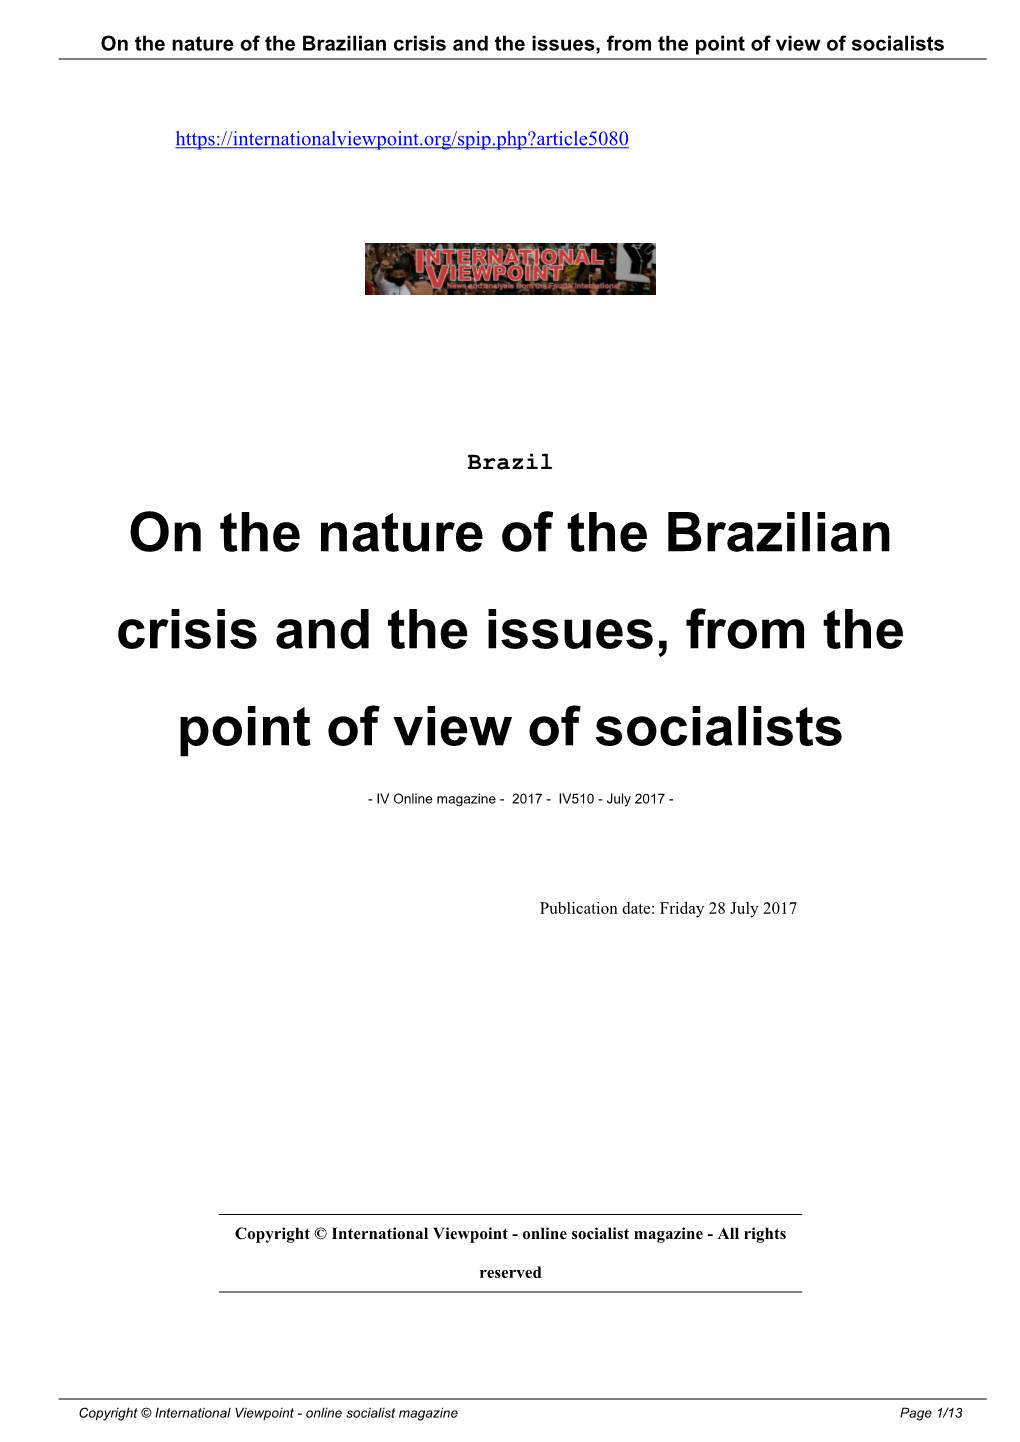 On the Nature of the Brazilian Crisis and the Issues, from the Point of View of Socialists